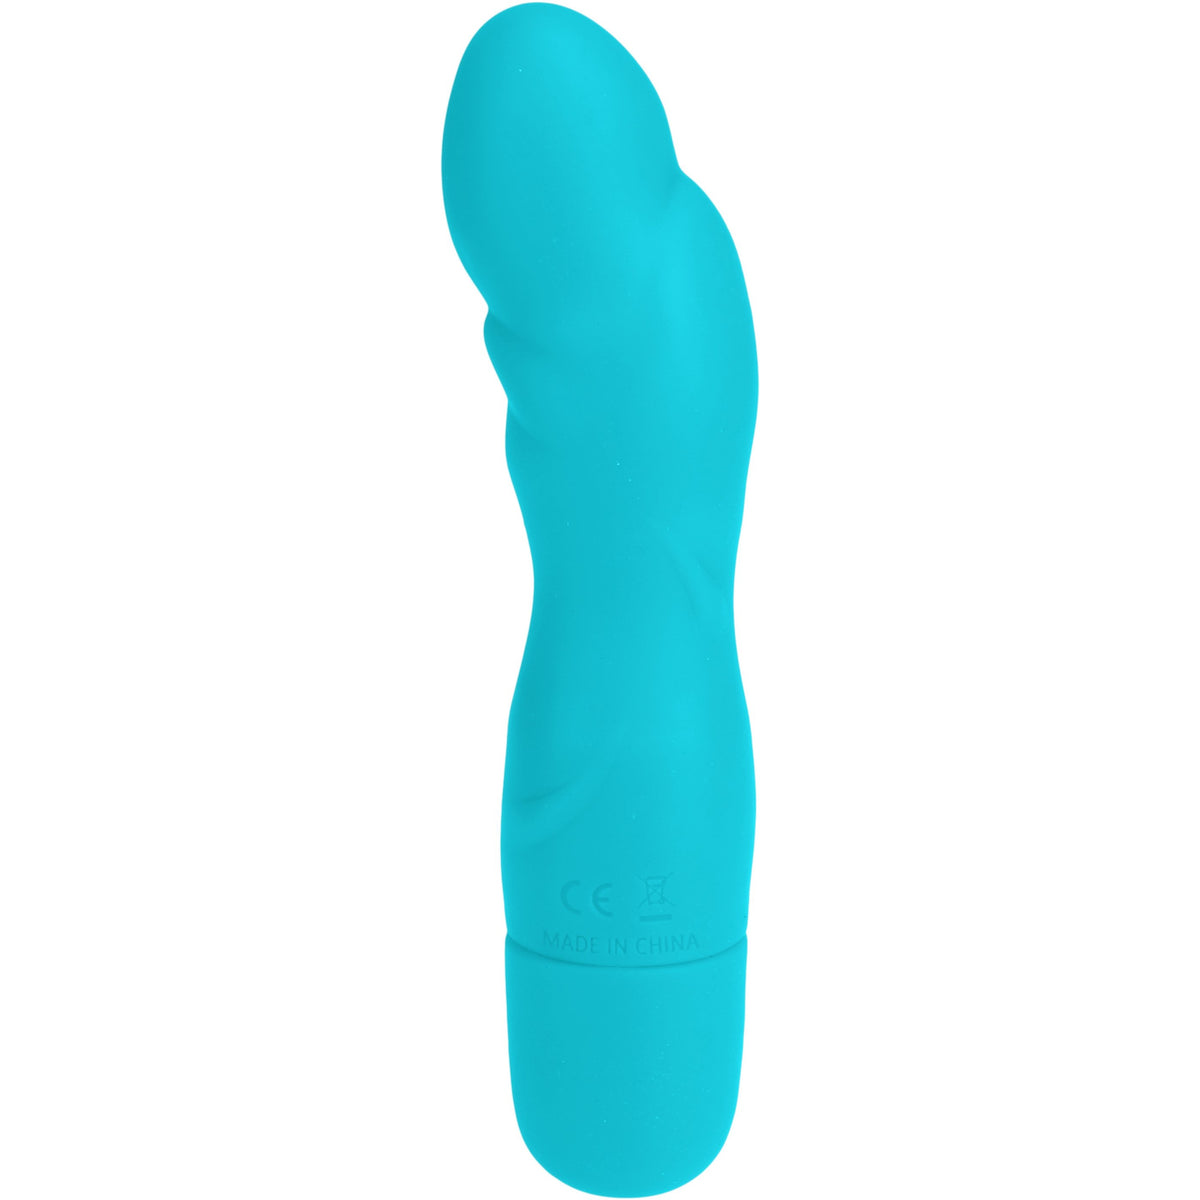 NMC First Night 5 inch Silicone 10 Function G-Spot Vibe with Ripples - Blue